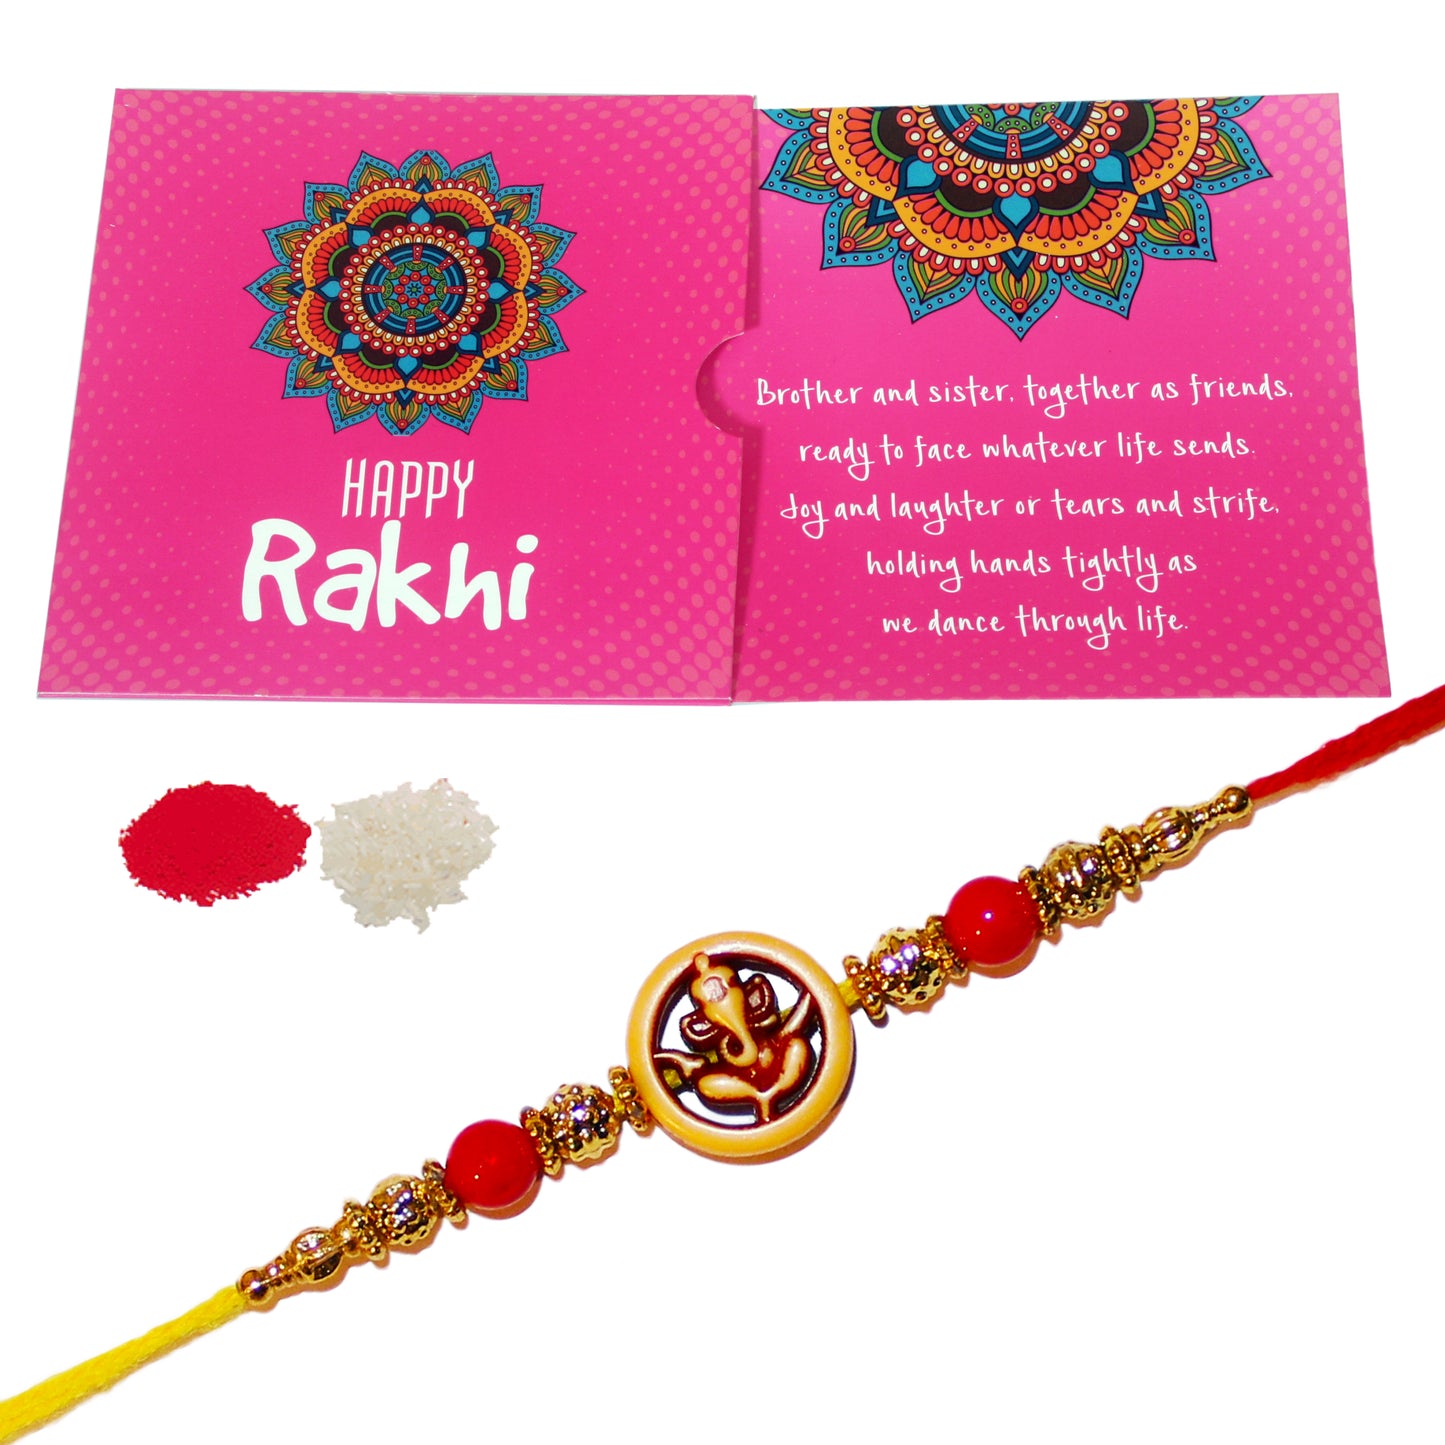 iberry's Rakhi Gift Pack with Set of one Rakhi, Greeting Card and Roli Chawal for Brother|Rakhi Combo with Branded Packaging-4343